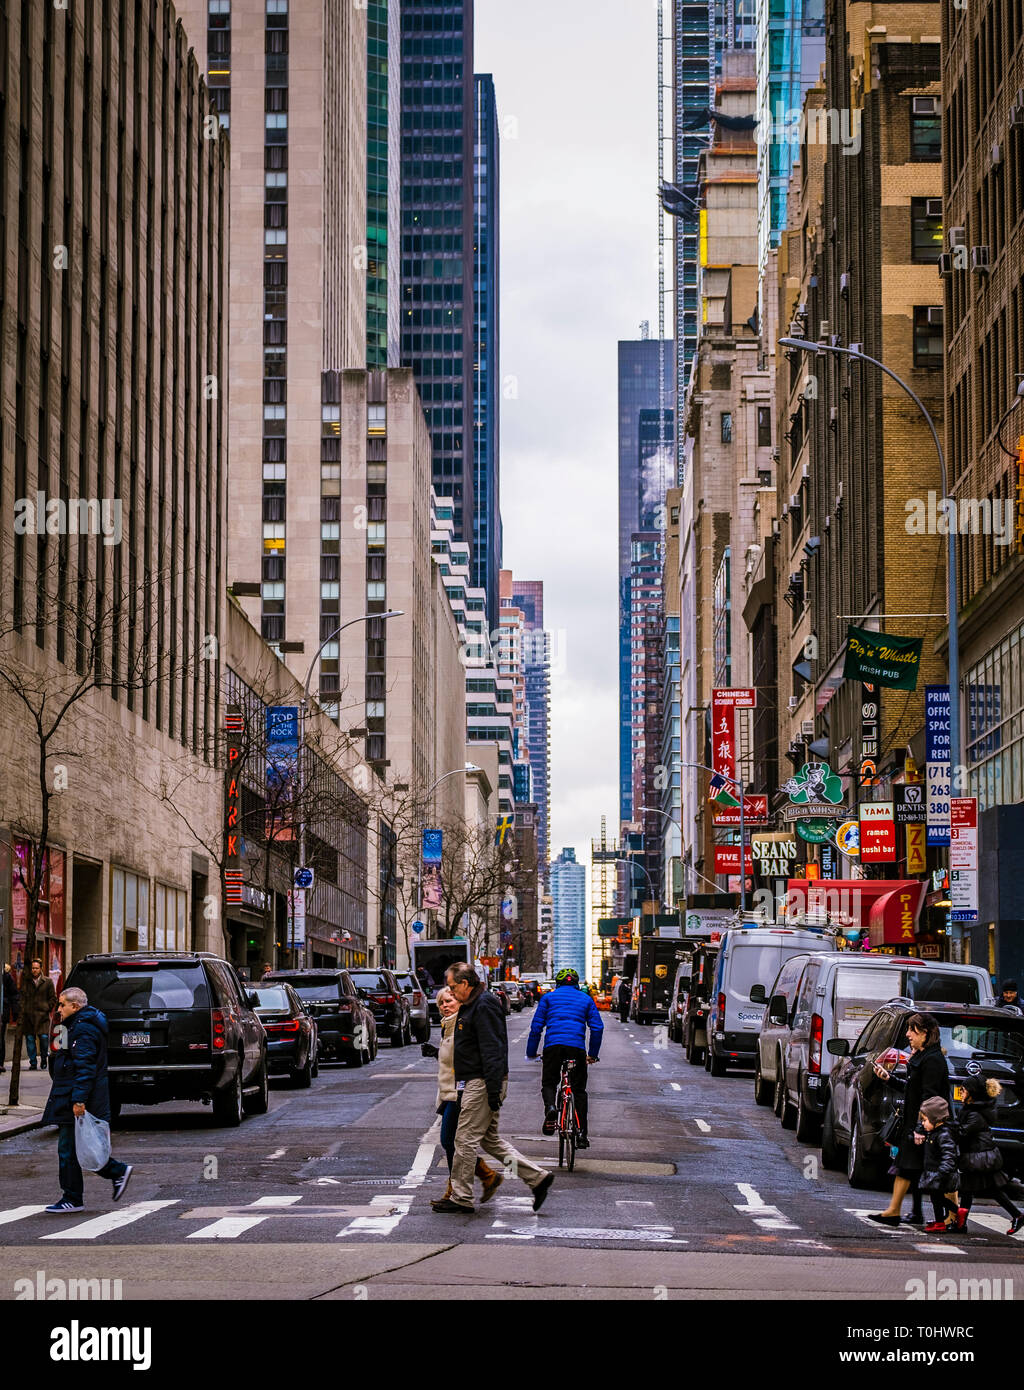 Typical New York City Street View Stock Photo